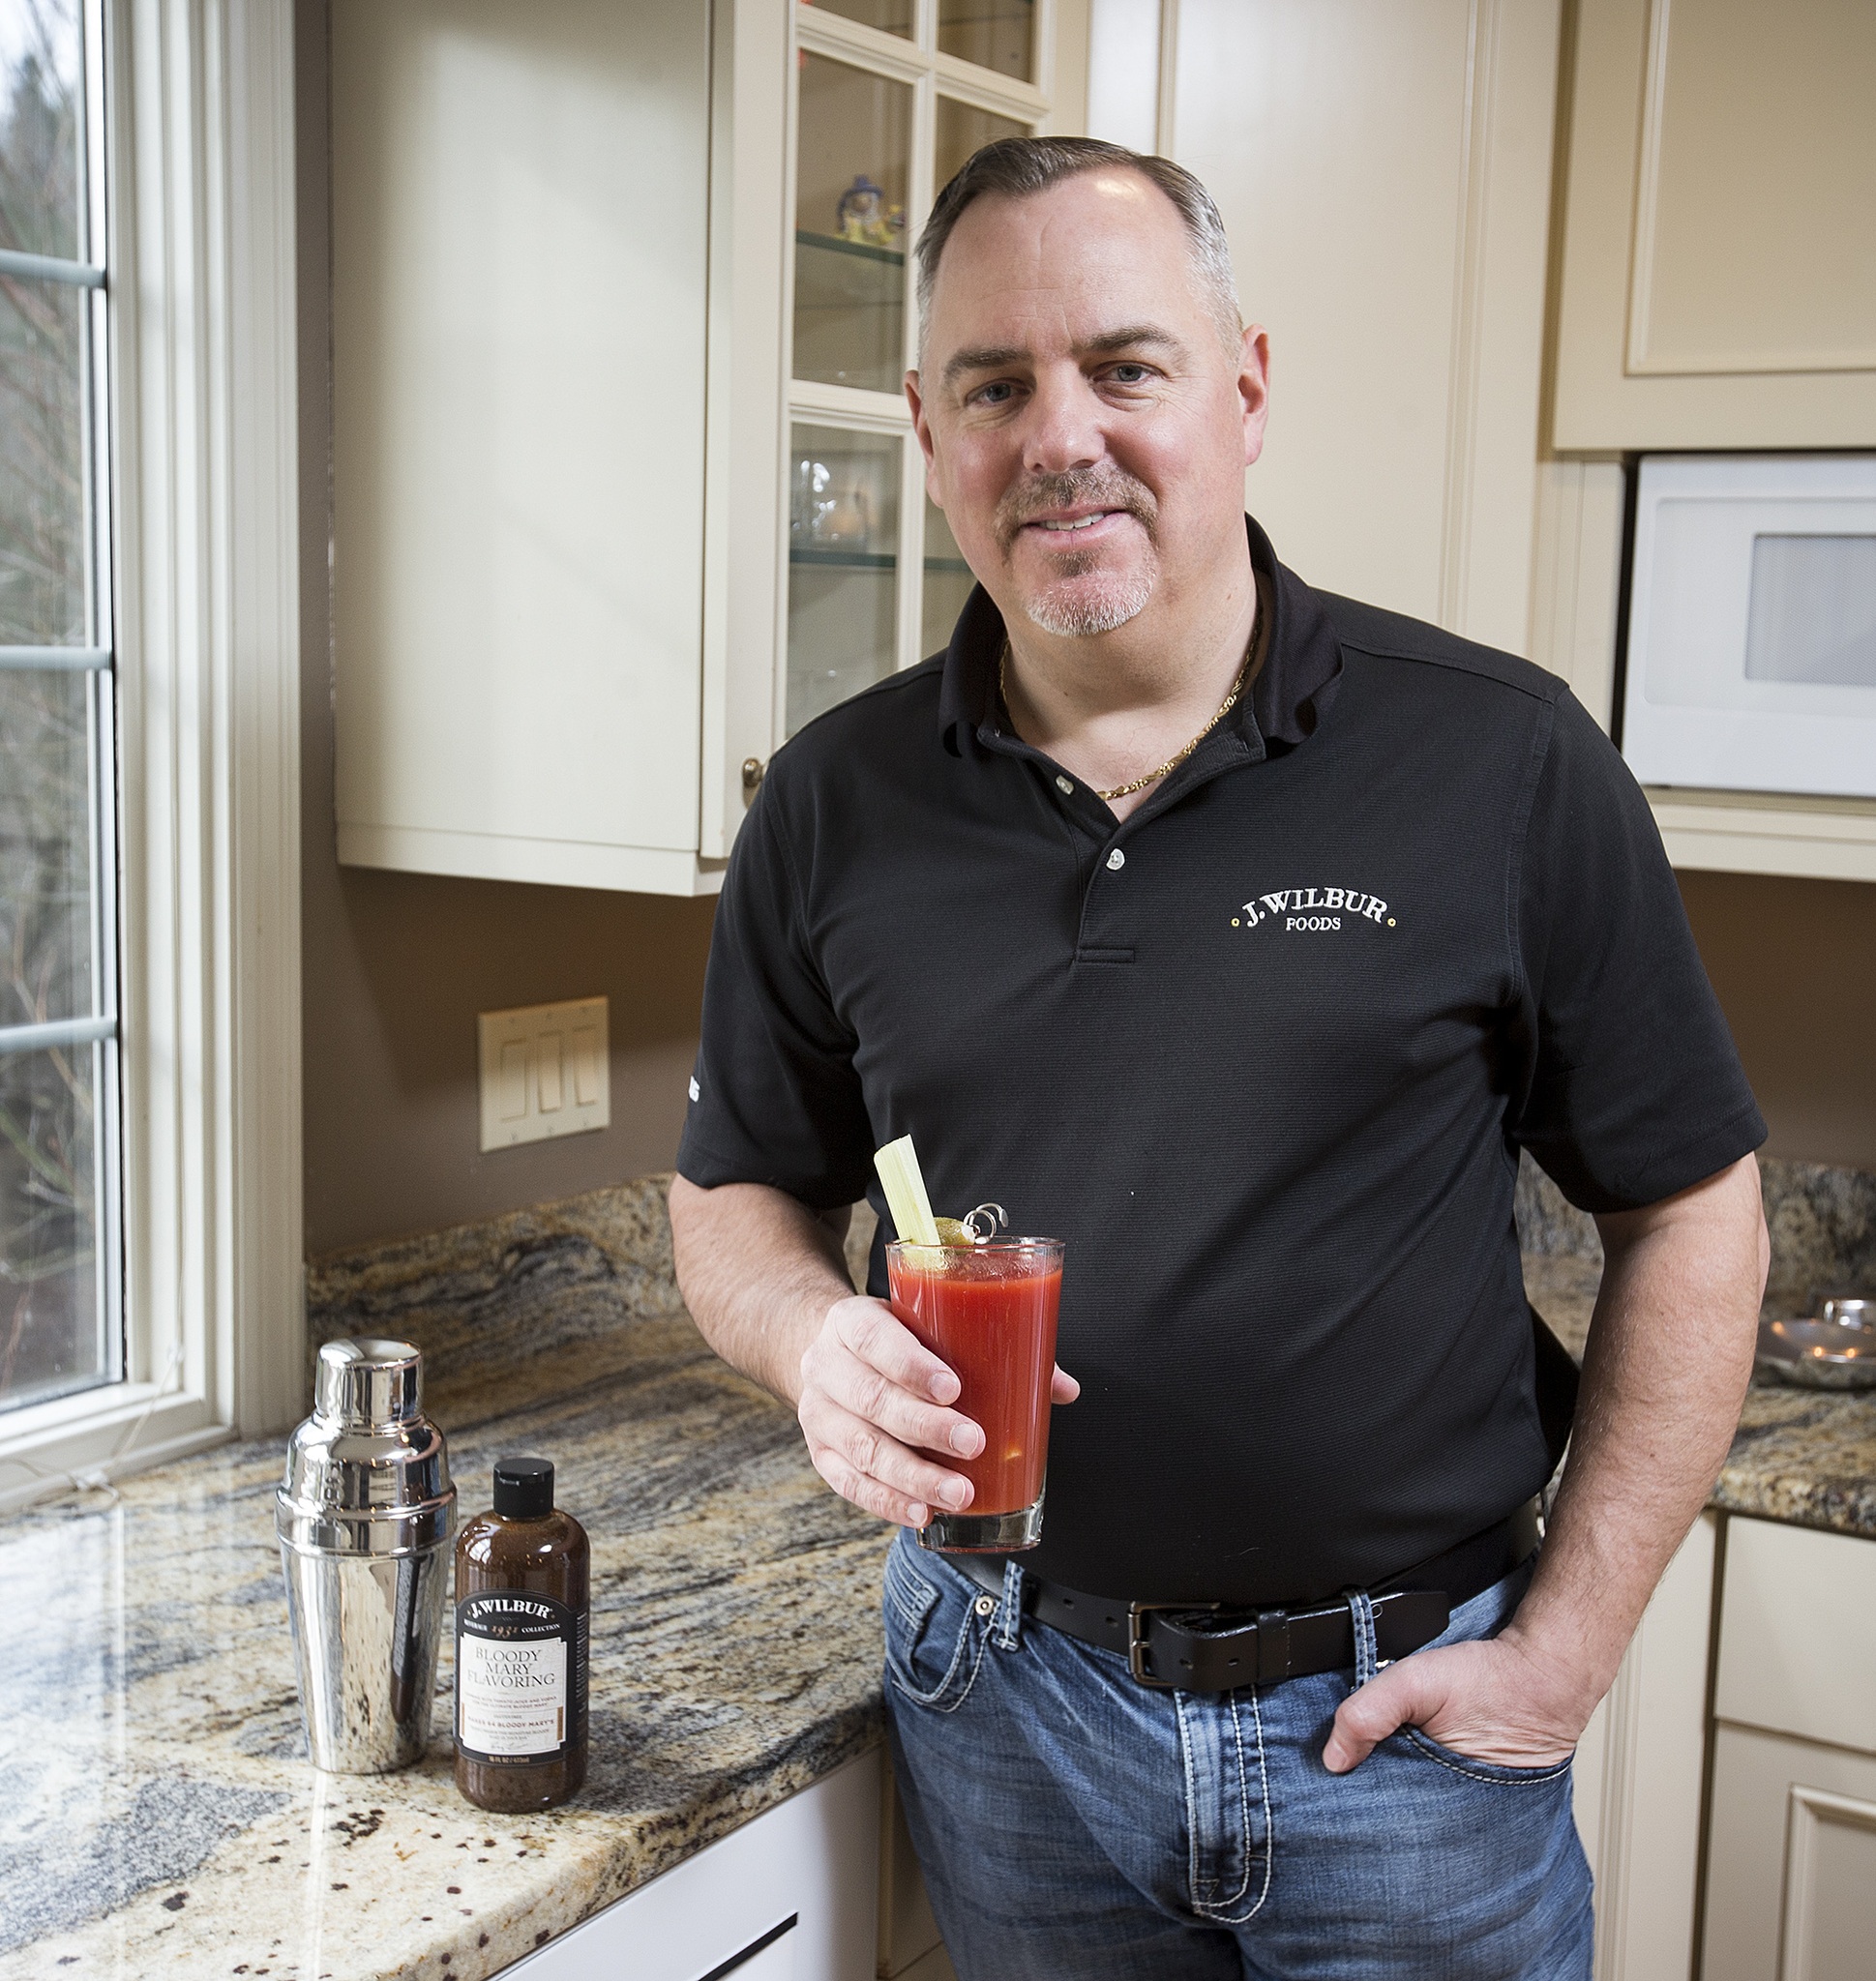 Andrew Holes is the founder of J. Wilbur Foods which makes three types of barbecue sauce as well as a bloody mary drink flavoring. (Ian Terry / The Herald)